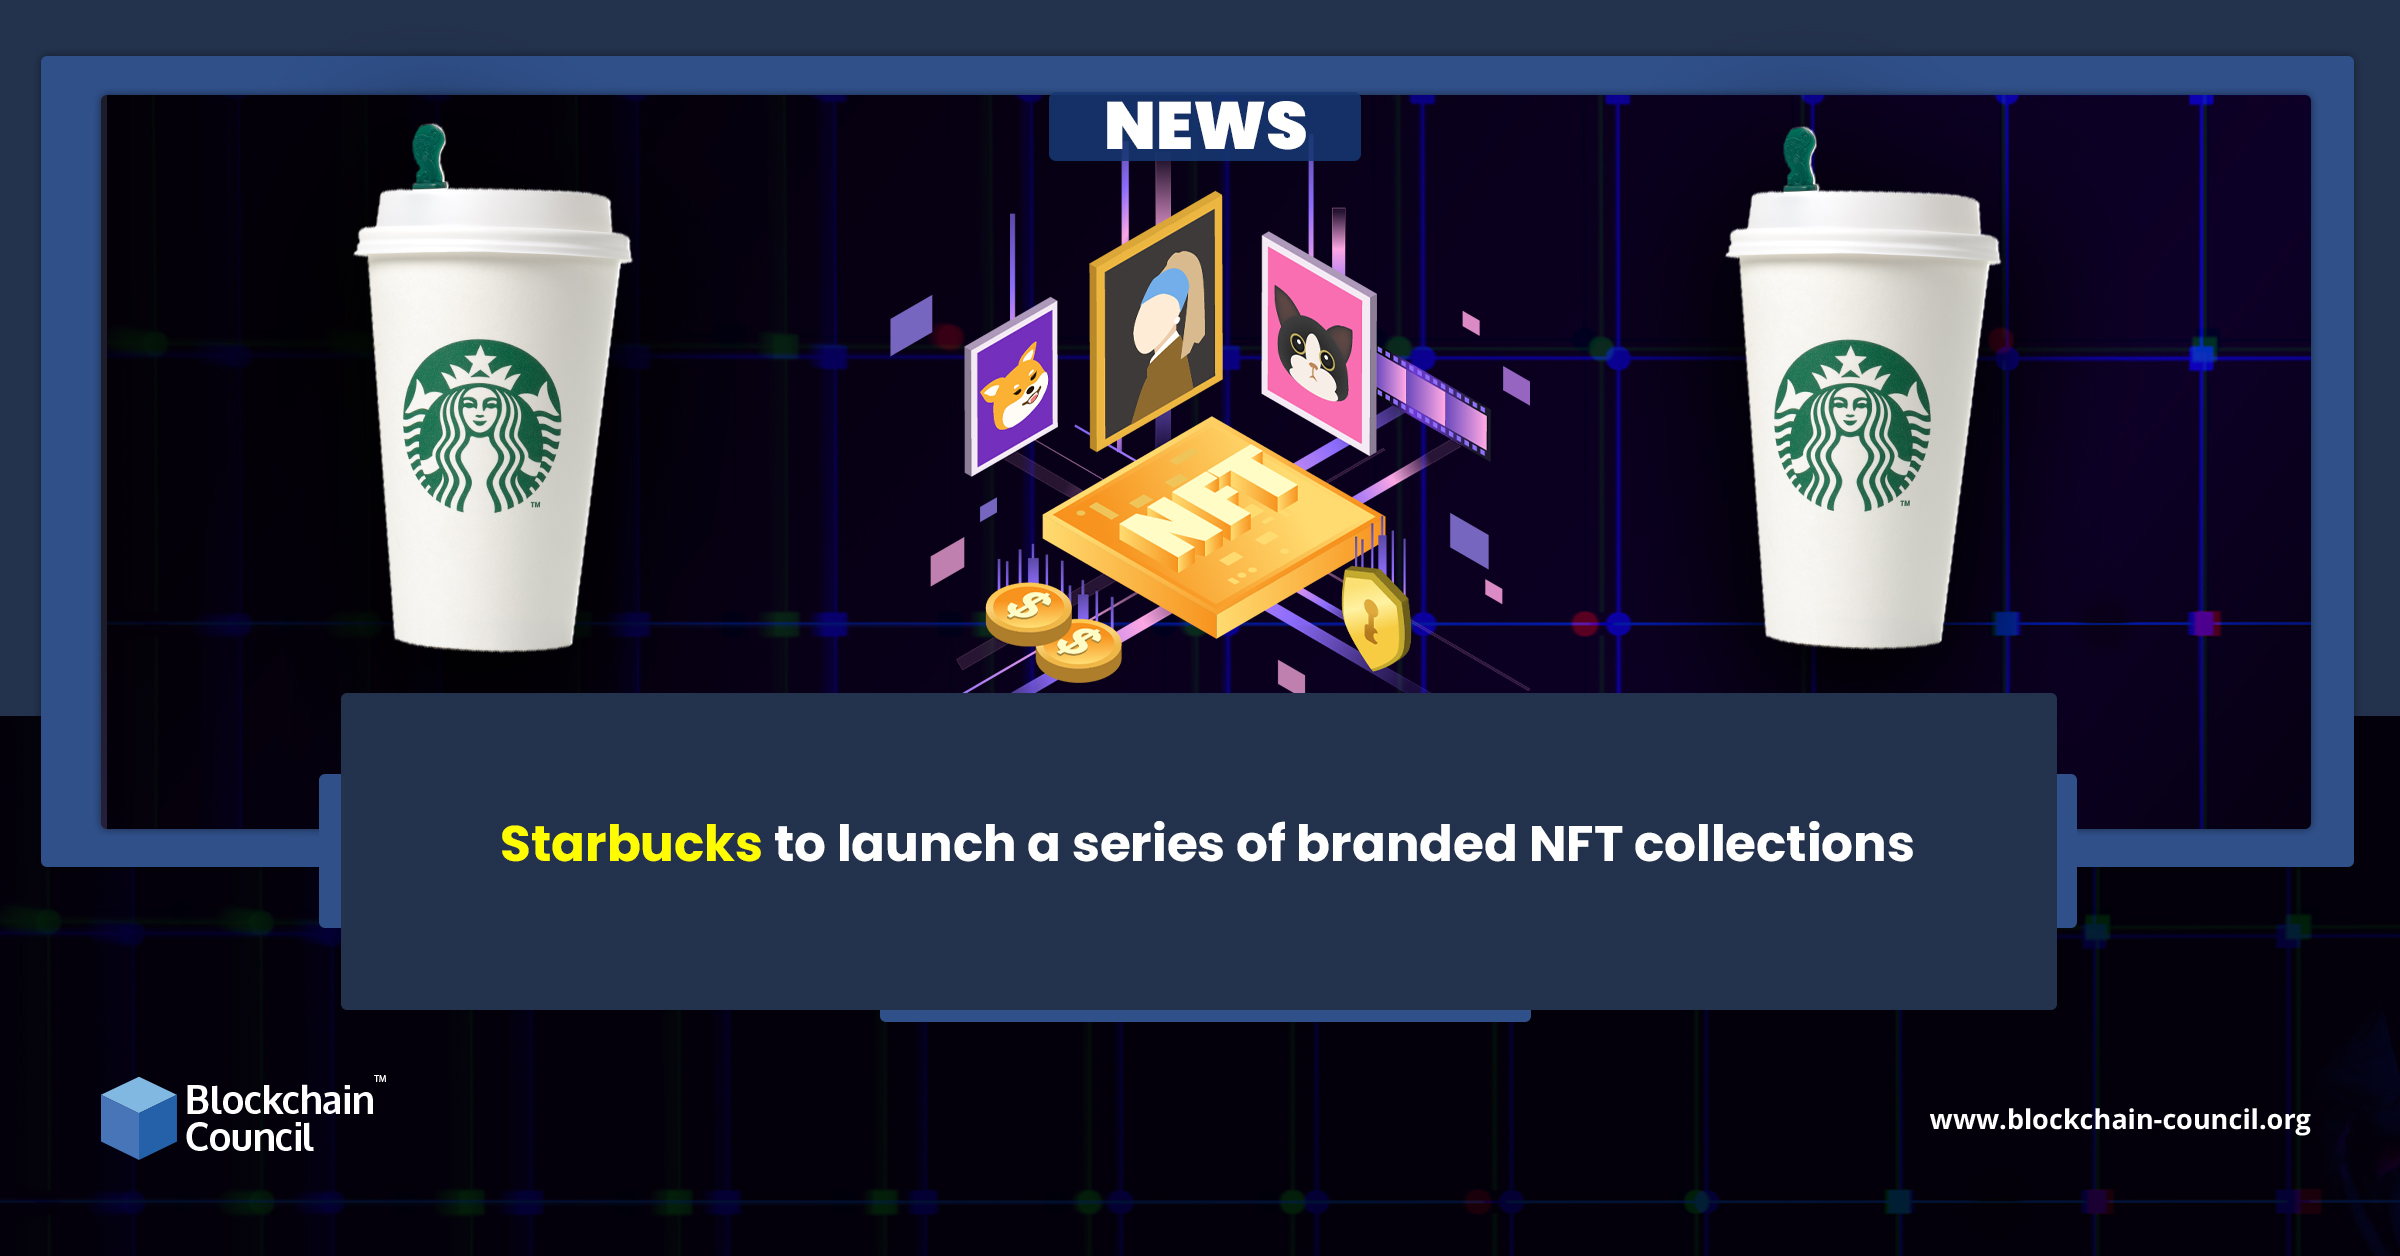 Starbucks to launch a series of branded NFT collections